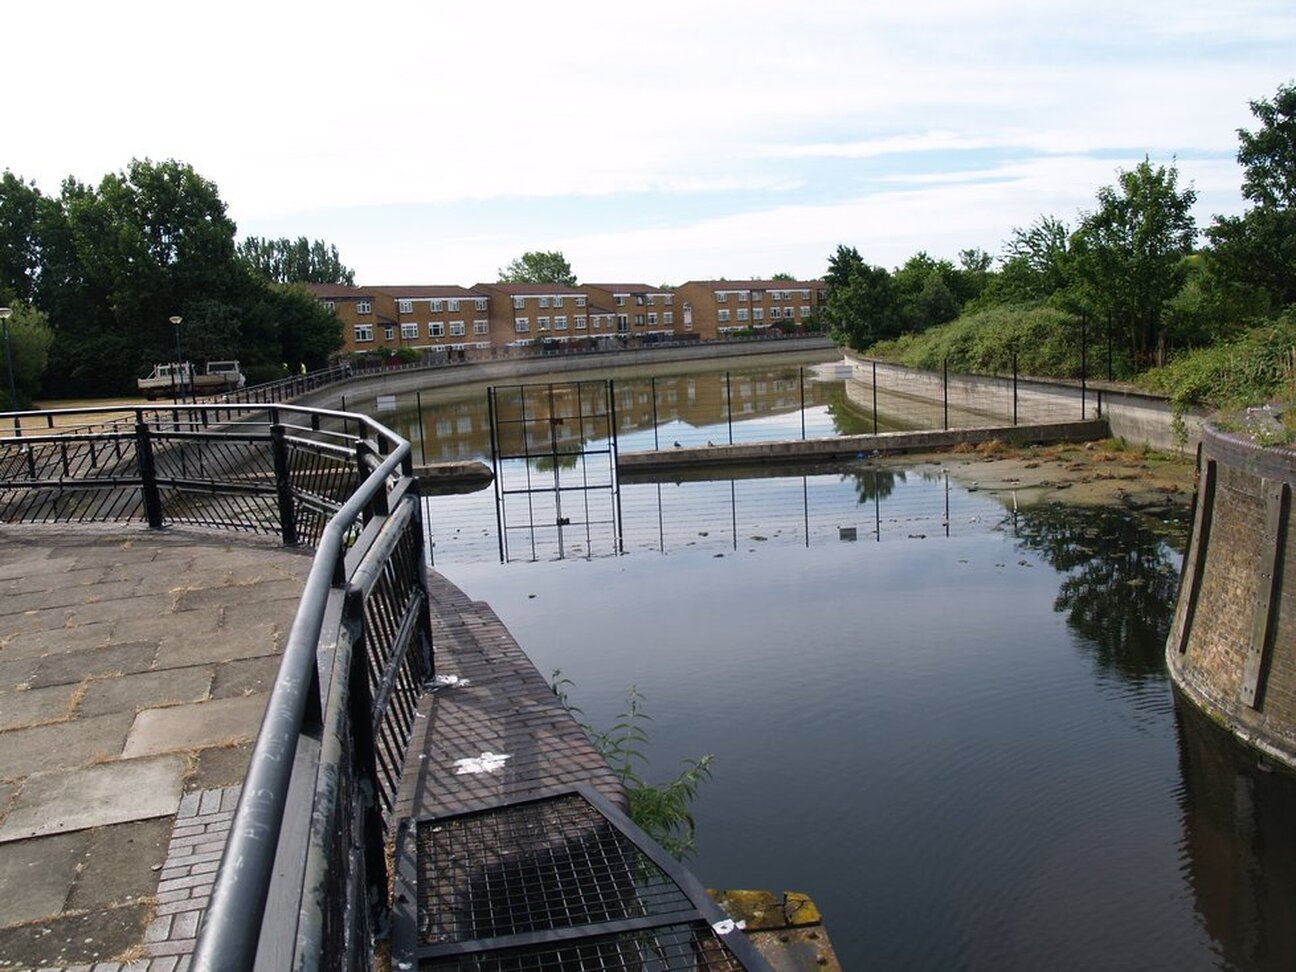 Broadwater in West Thamesmead used to be known as Royal Arsenal Canal or Pilkington Canal or Ordnance Canal as carried munitions from Waltham Abbey to the adjacent Royal Arsenal